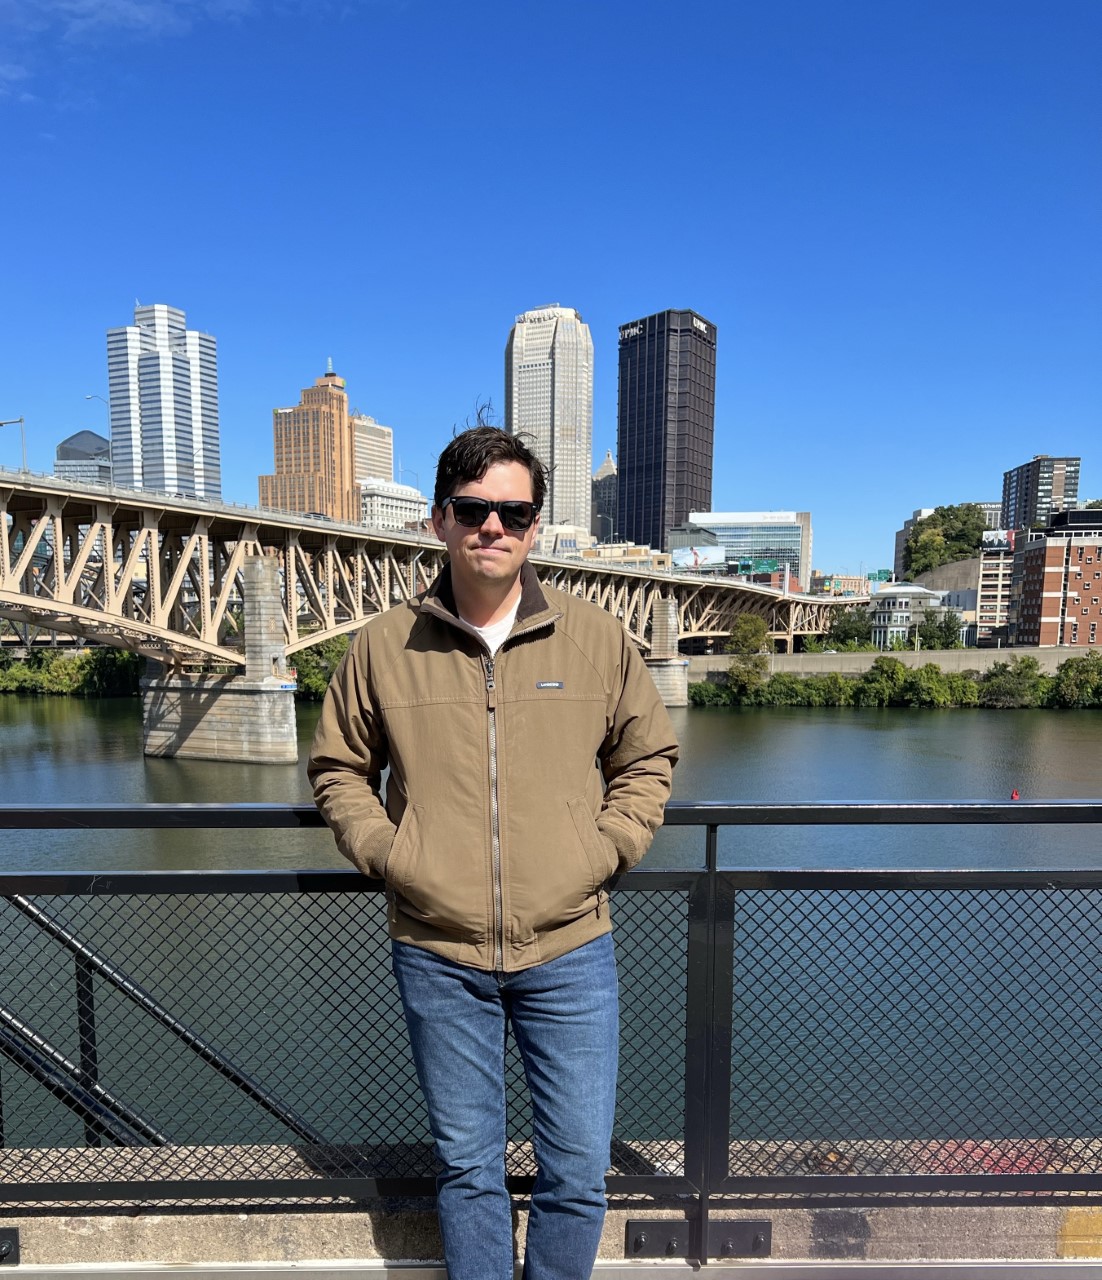 Jon standing on riverside with bridges and downtown pittsburgh in background